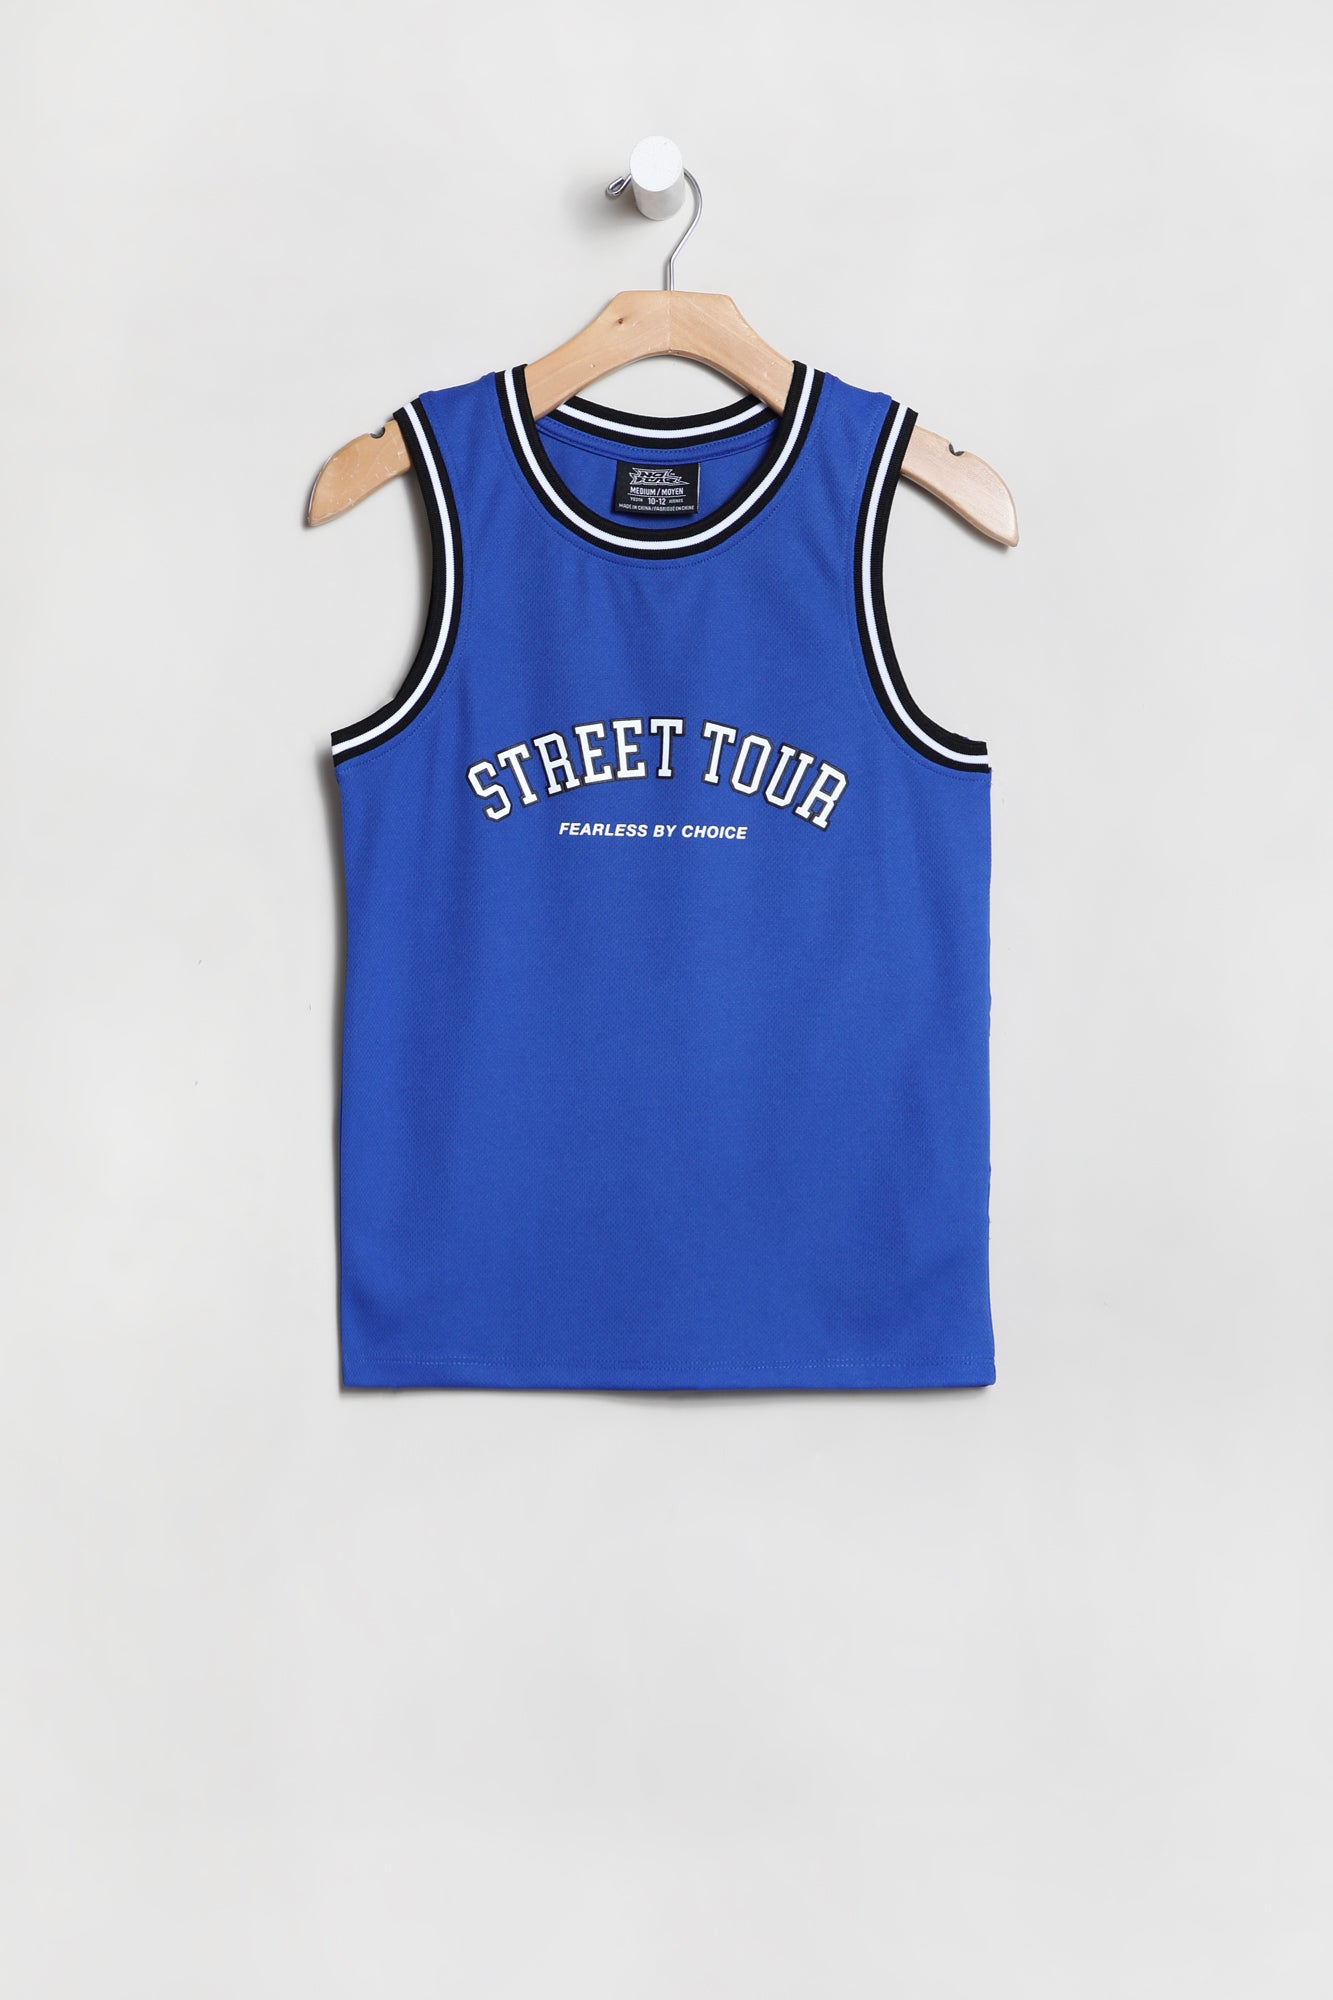 No Fear Youth Basketball Jersey Tank Top - Royal Blue /